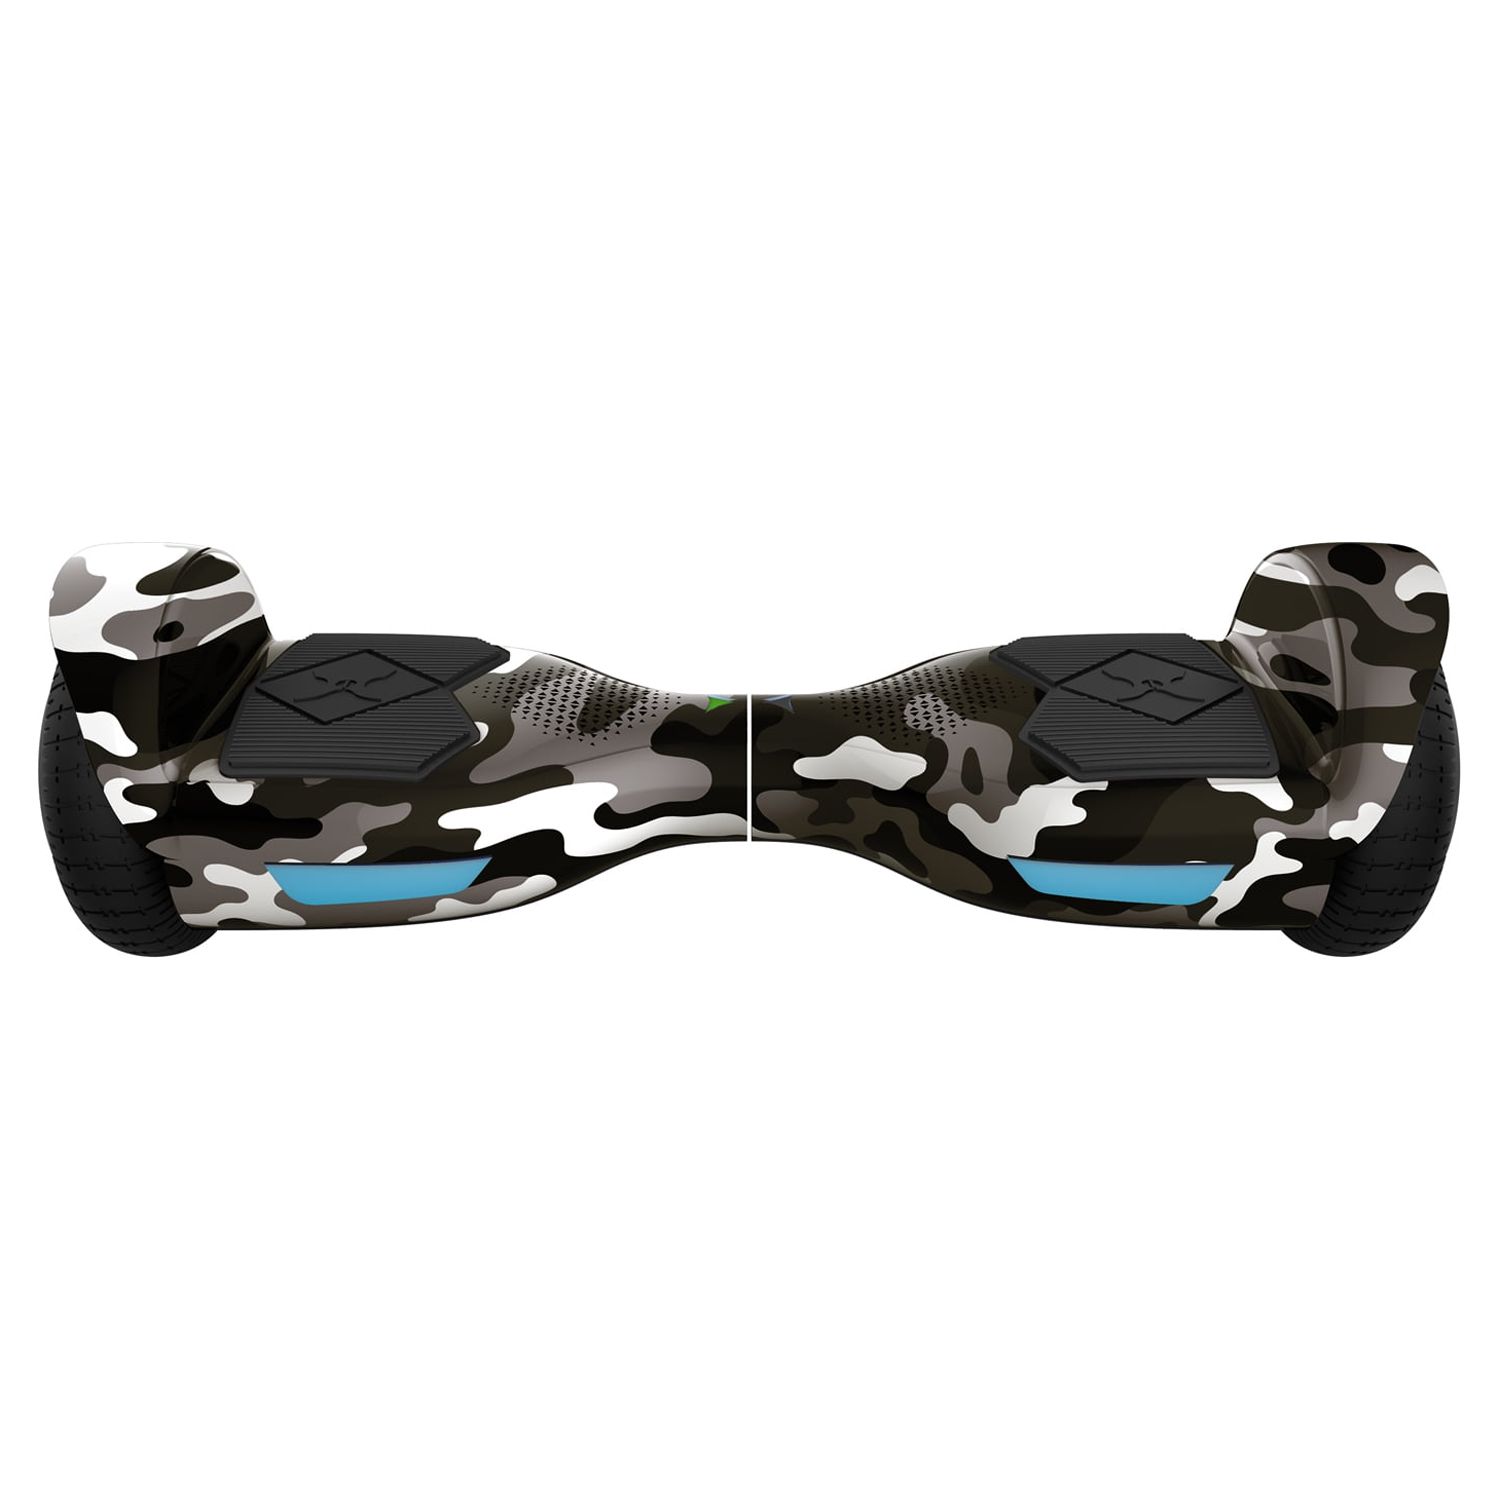 Hover-1 Helix UL Certified Electric Hoverboard with 6.5 In. LED Wheels, LED Sensor Lights, Bluetooth Speaker, Lithium-ion 10 Cell battery, Ages 8+, 160 Lbs Max Weight, Camouflage - image 1 of 10